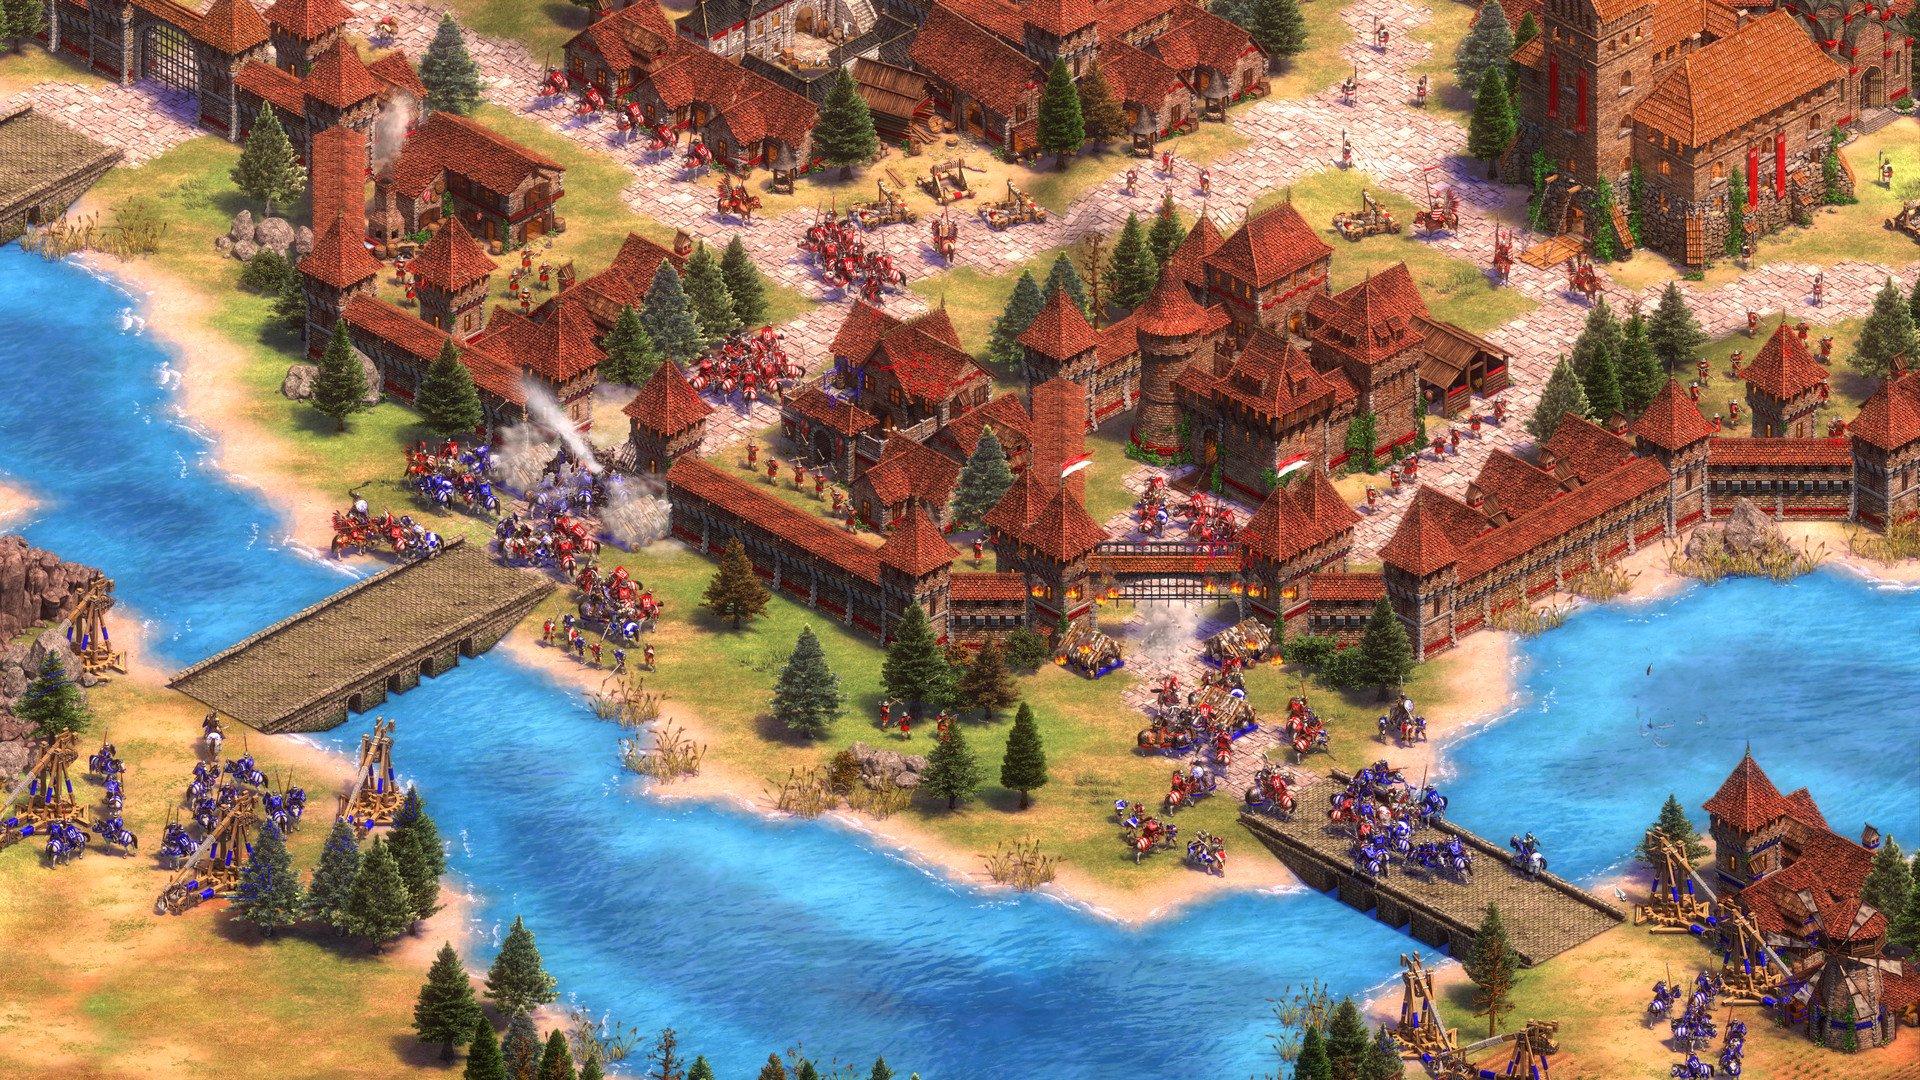 Age of Empires 2: Definitive Edition devs discuss technical